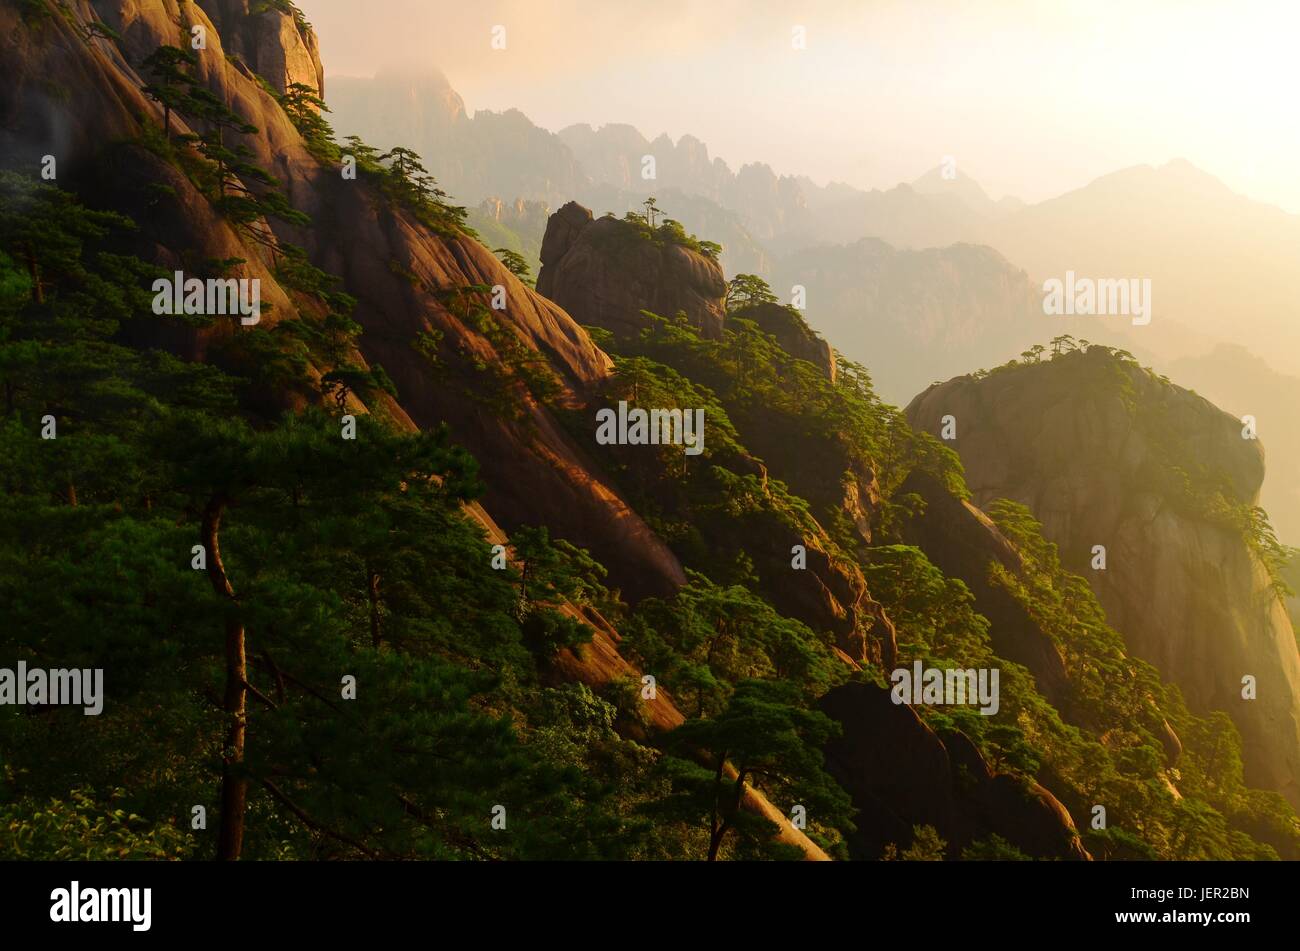 Golden hour in Yellow Mountain, a UNESCO world heritage site and major tourist attraction in China Stock Photo